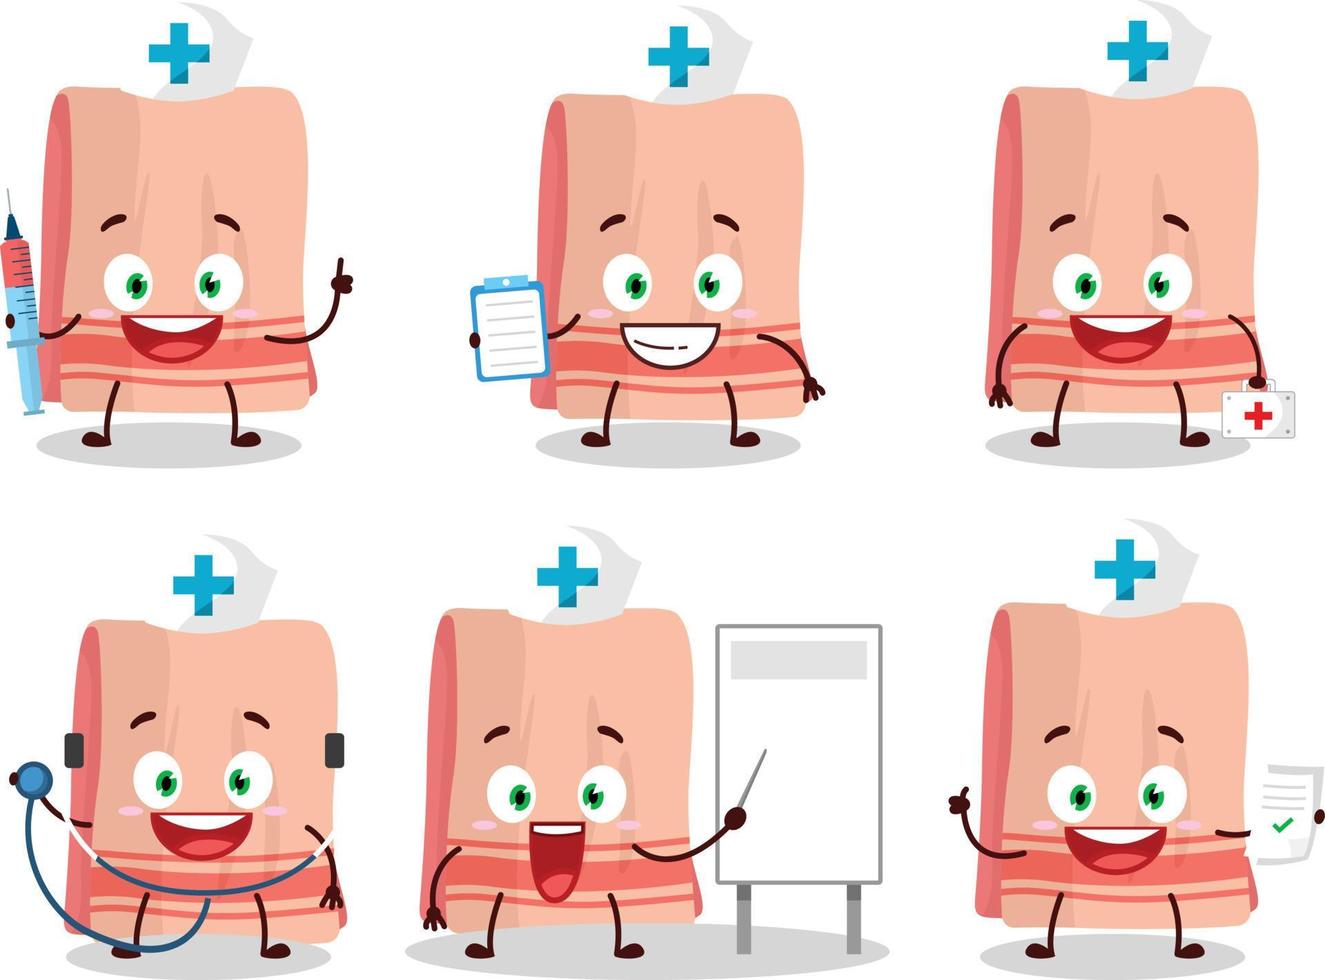 Doctor profession emoticon with towel cartoon character vector